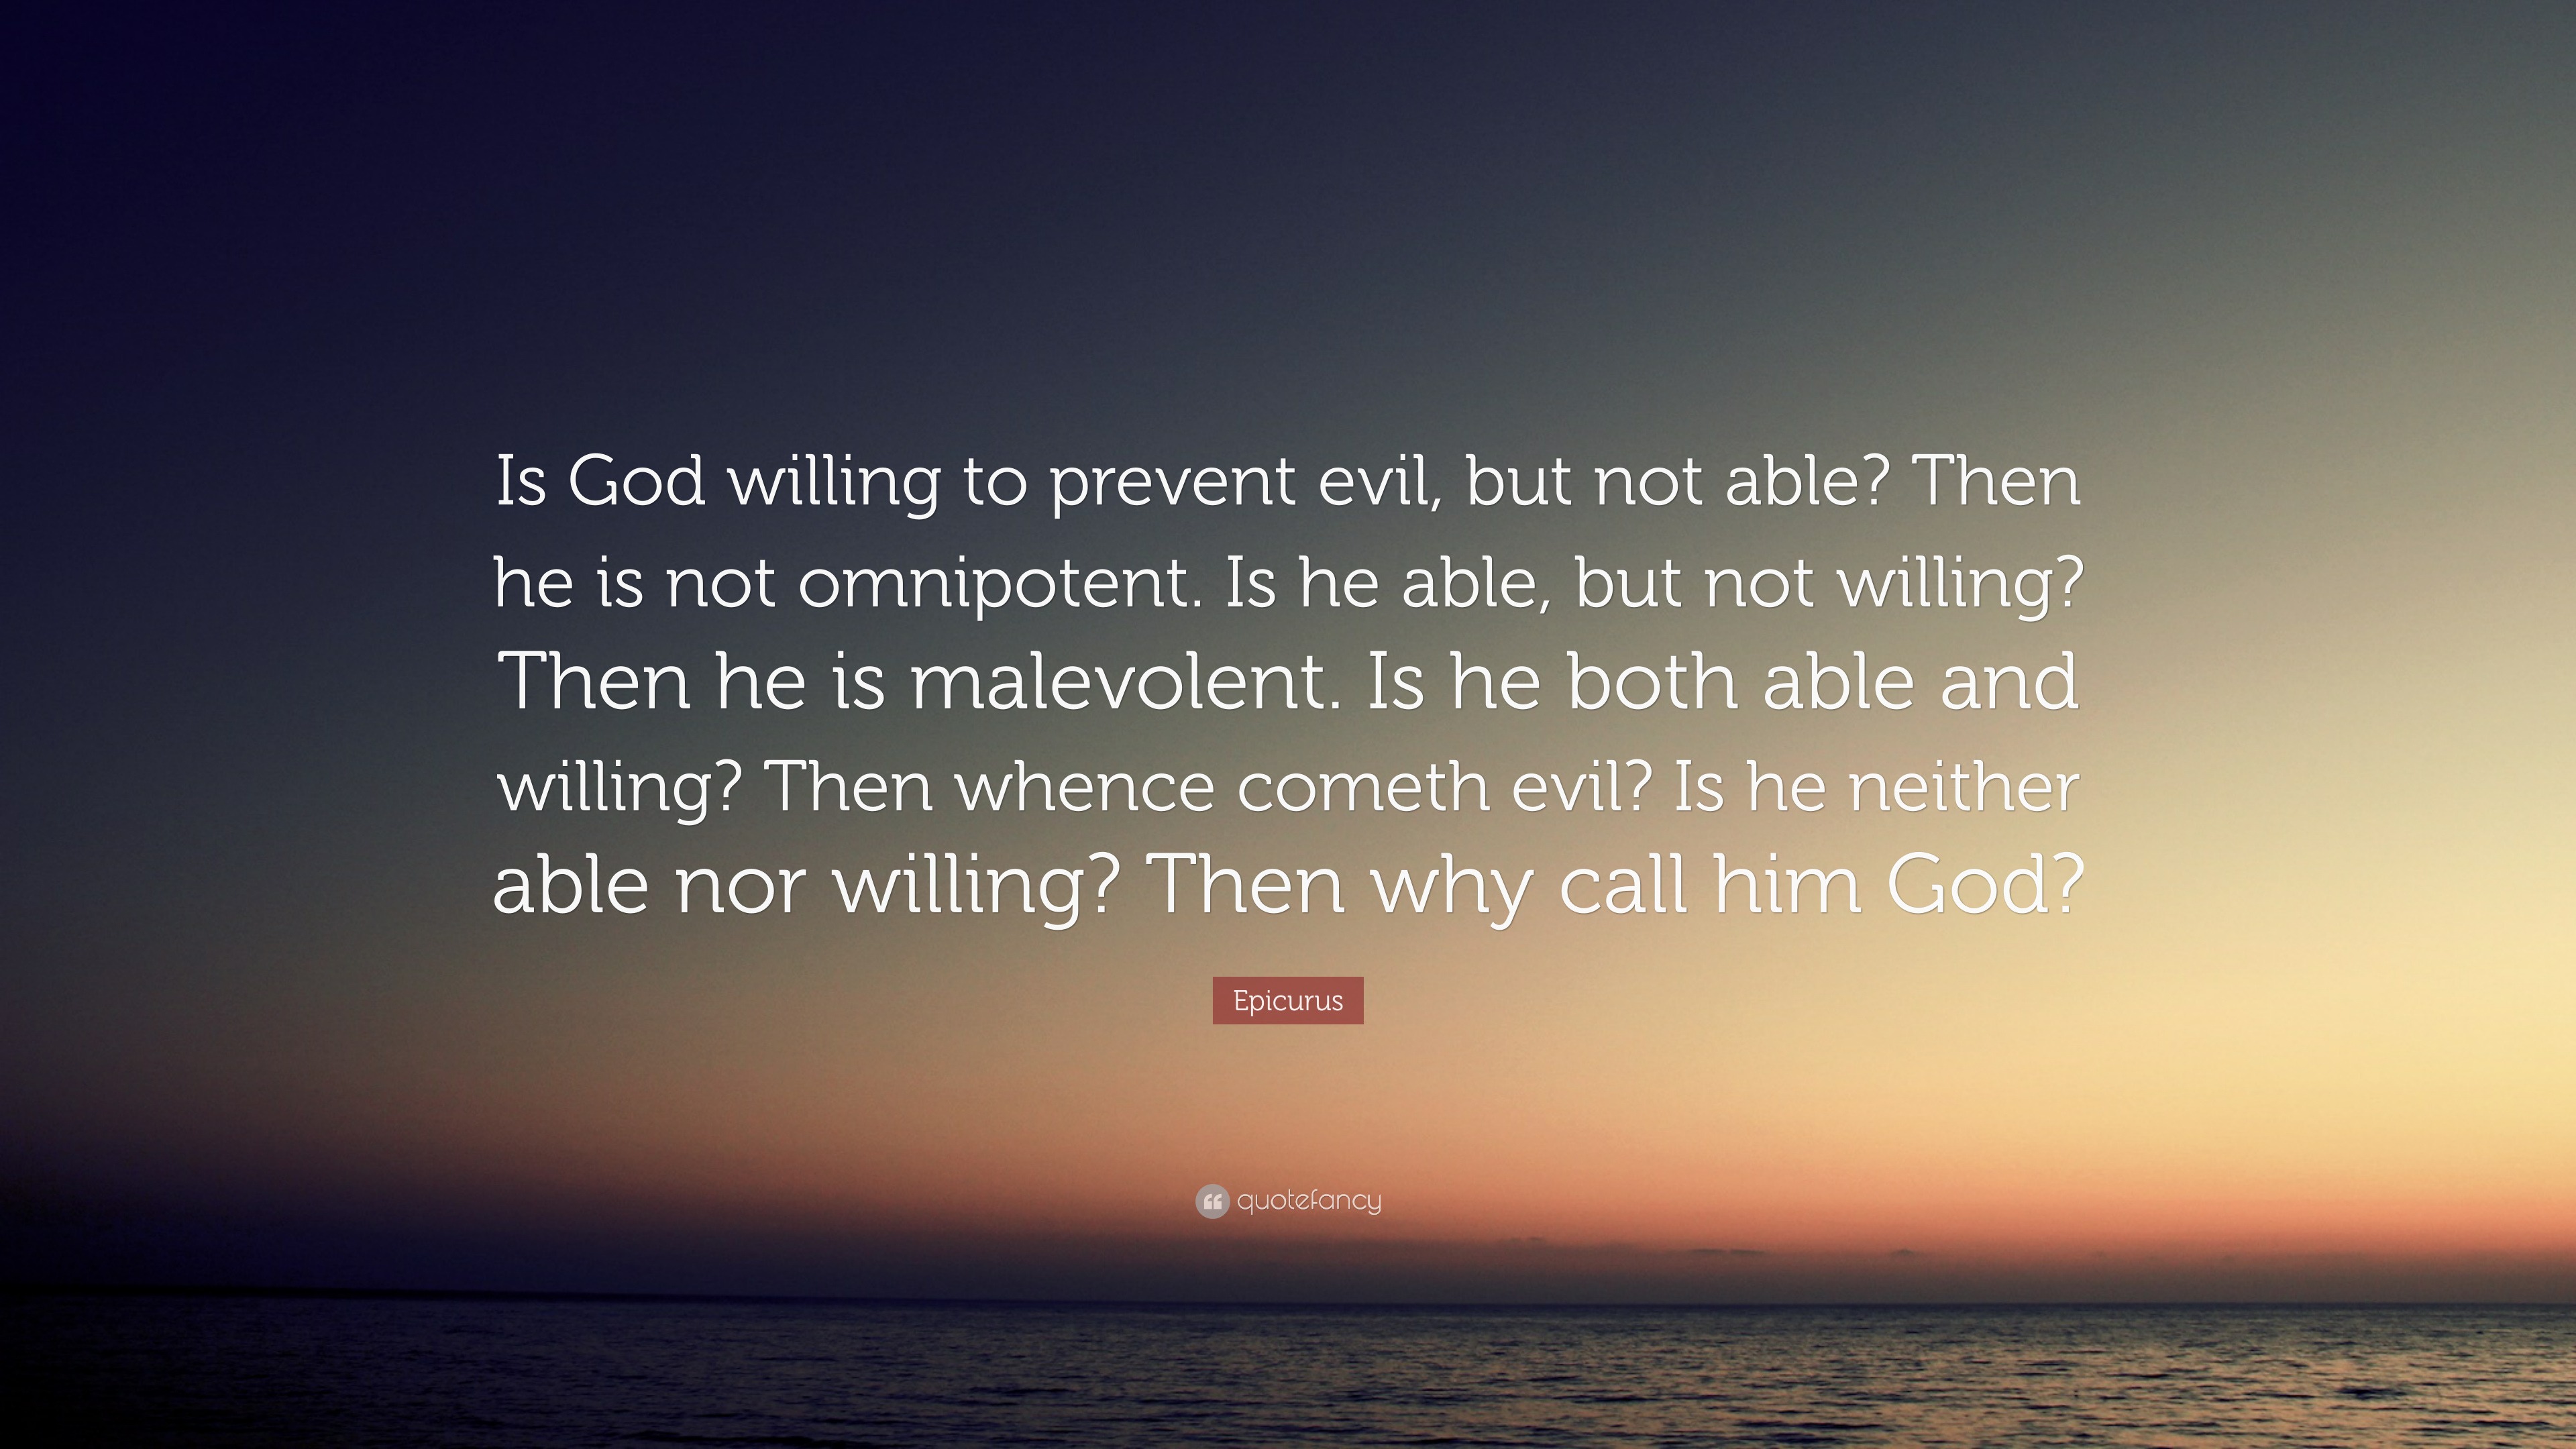 the god is not willing